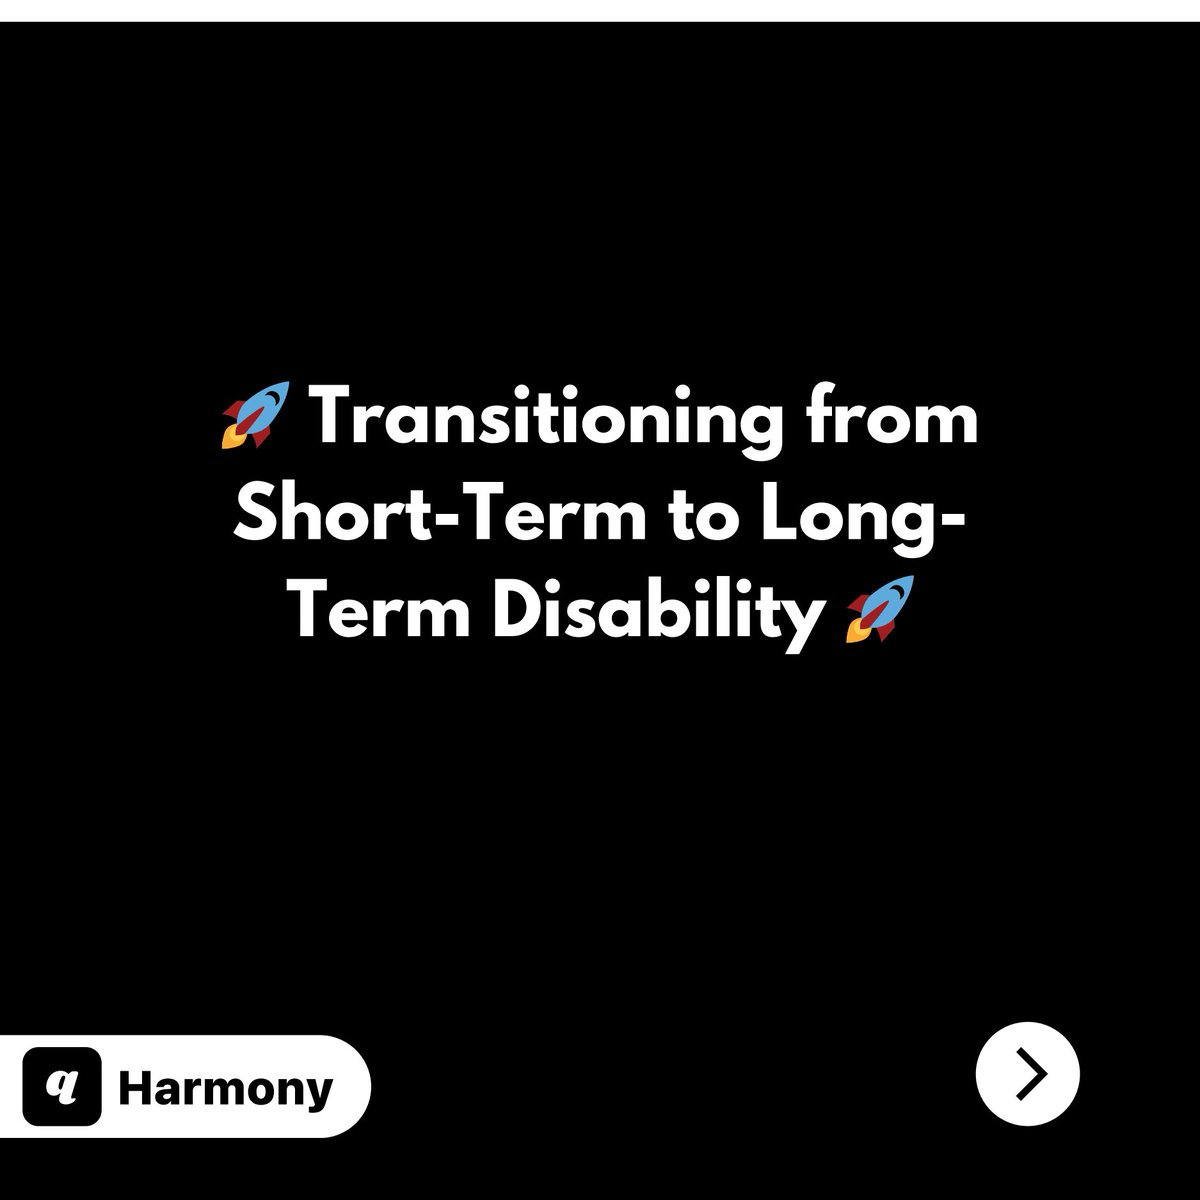 Can You Go From Short-Term Disability to Long-Term Disability Learn more: getqharmony.com/blog/going-fro…… #DisabilityJourney #NavigatingDisability #ShortToLongTerm #DisabilityTransition #DisabilitySupport #DisabilityBenefits #qHarmony